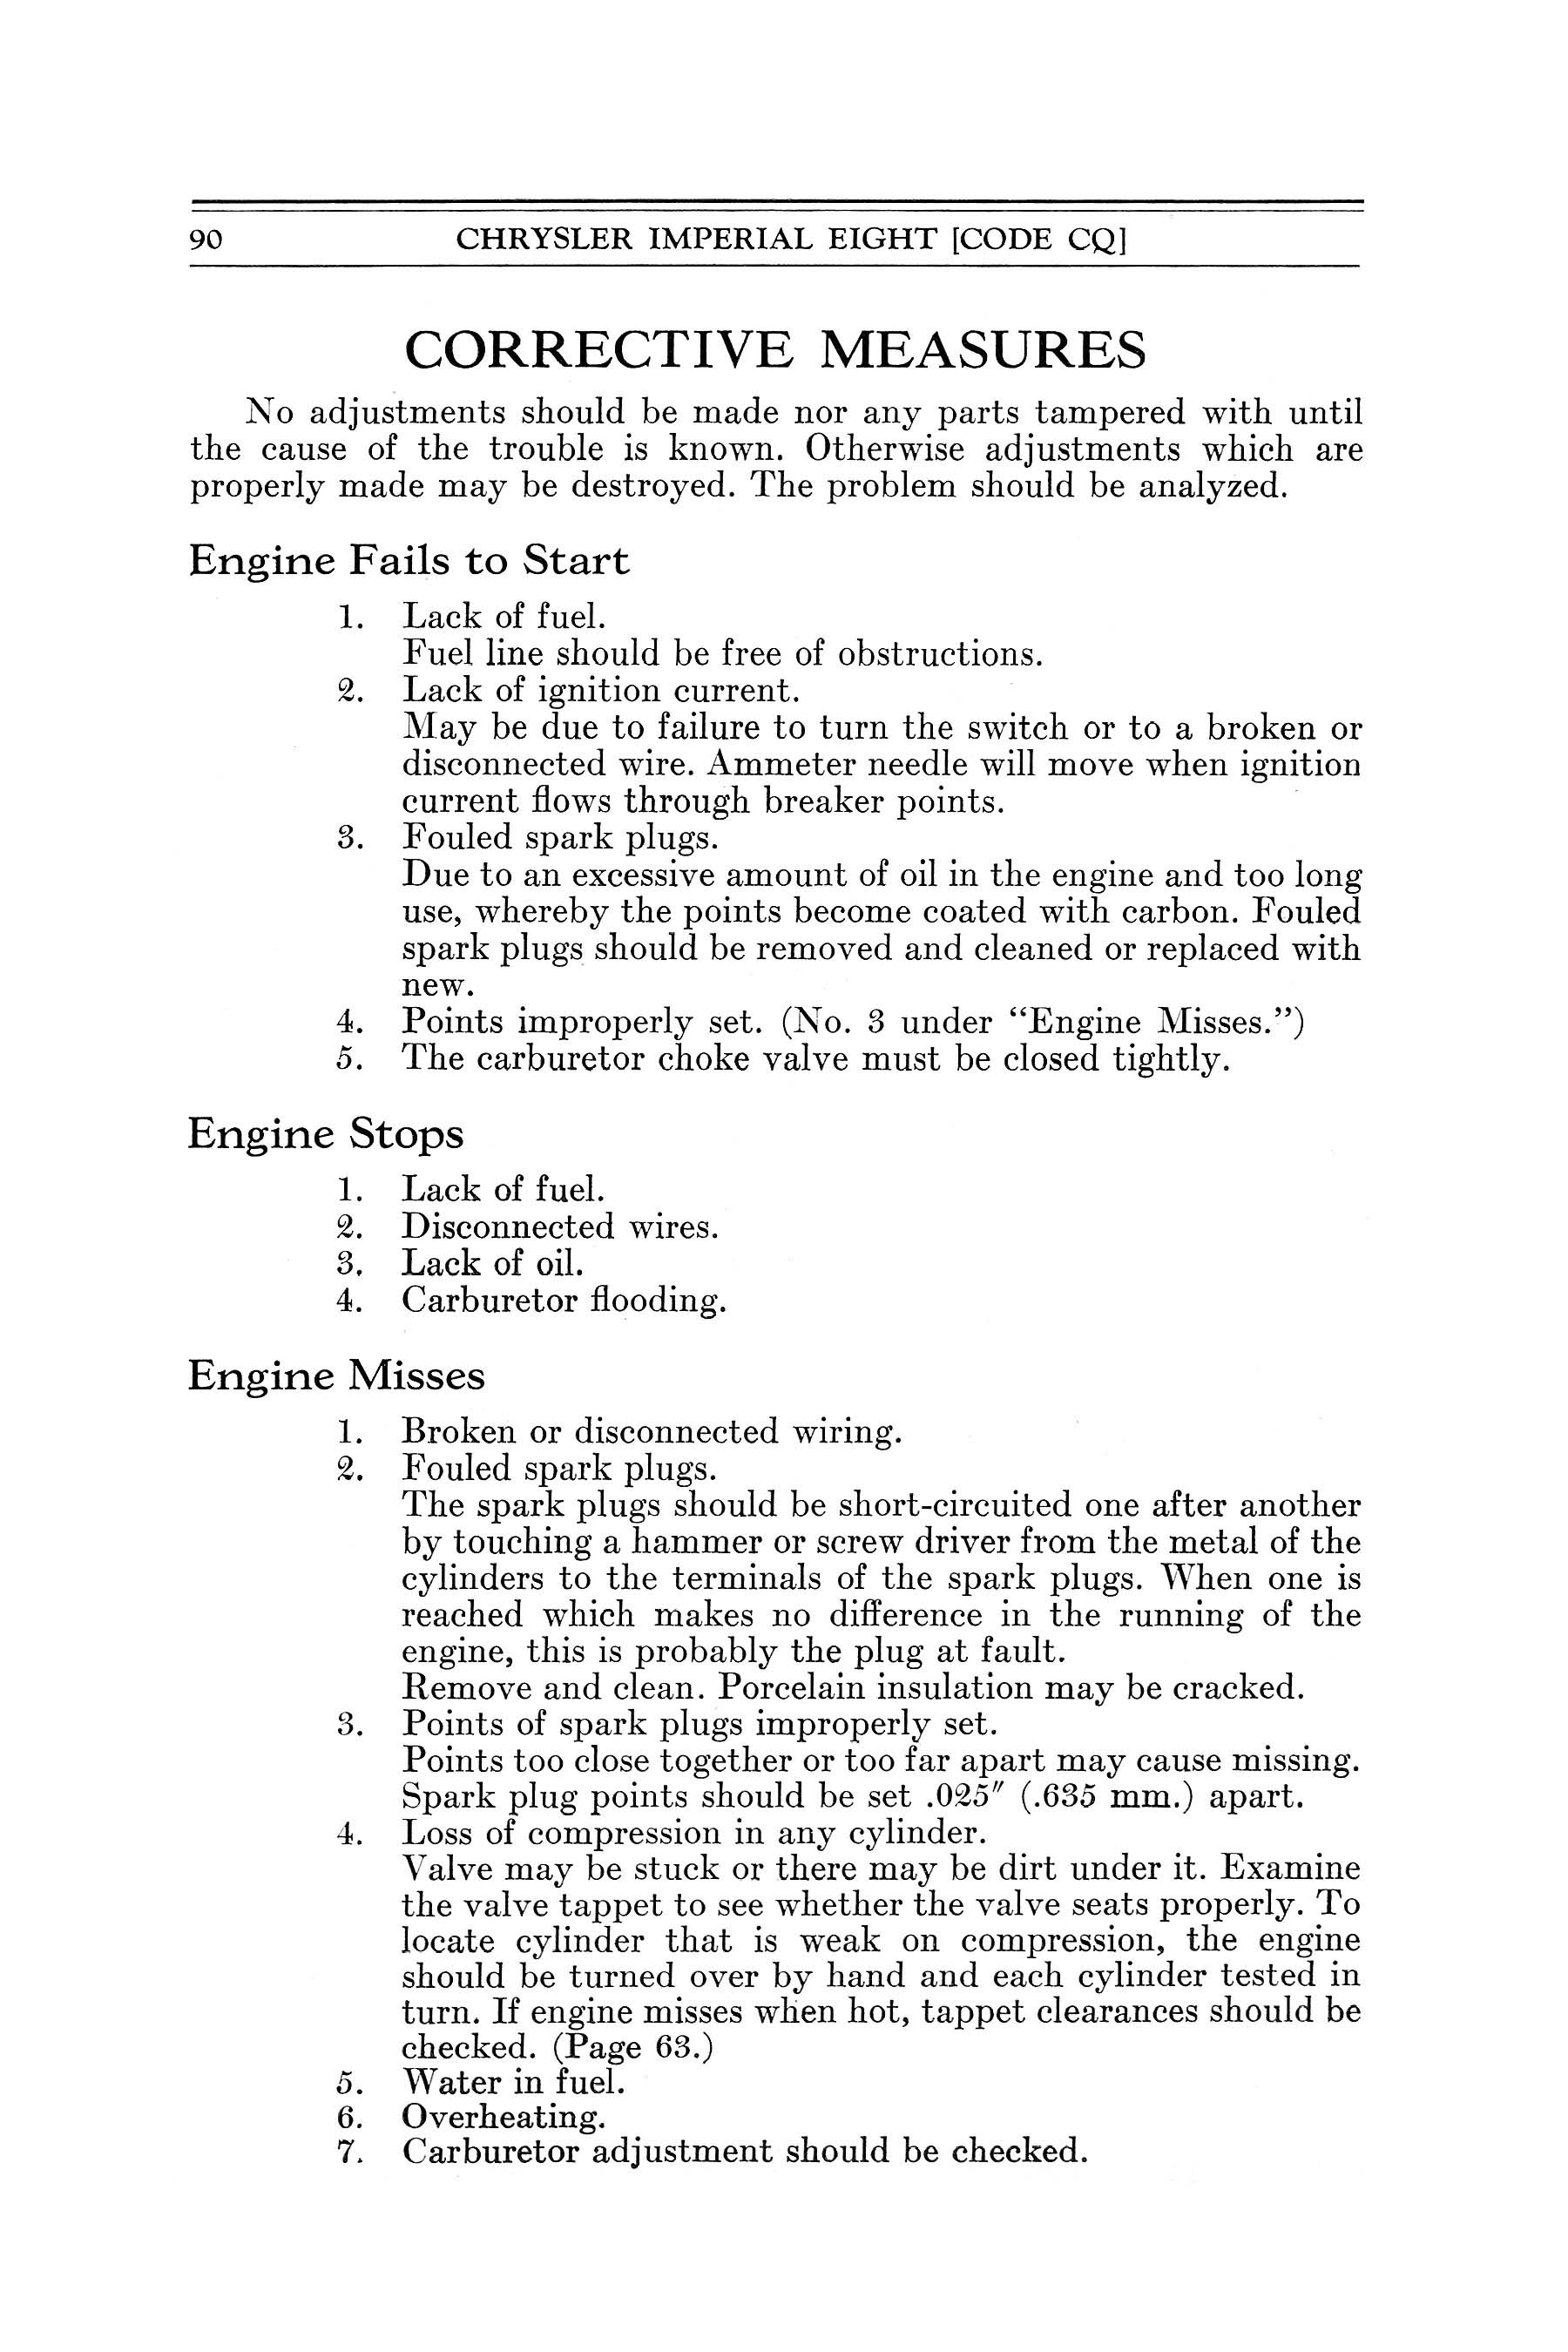 1933_Imperial_Instruction_Book-090